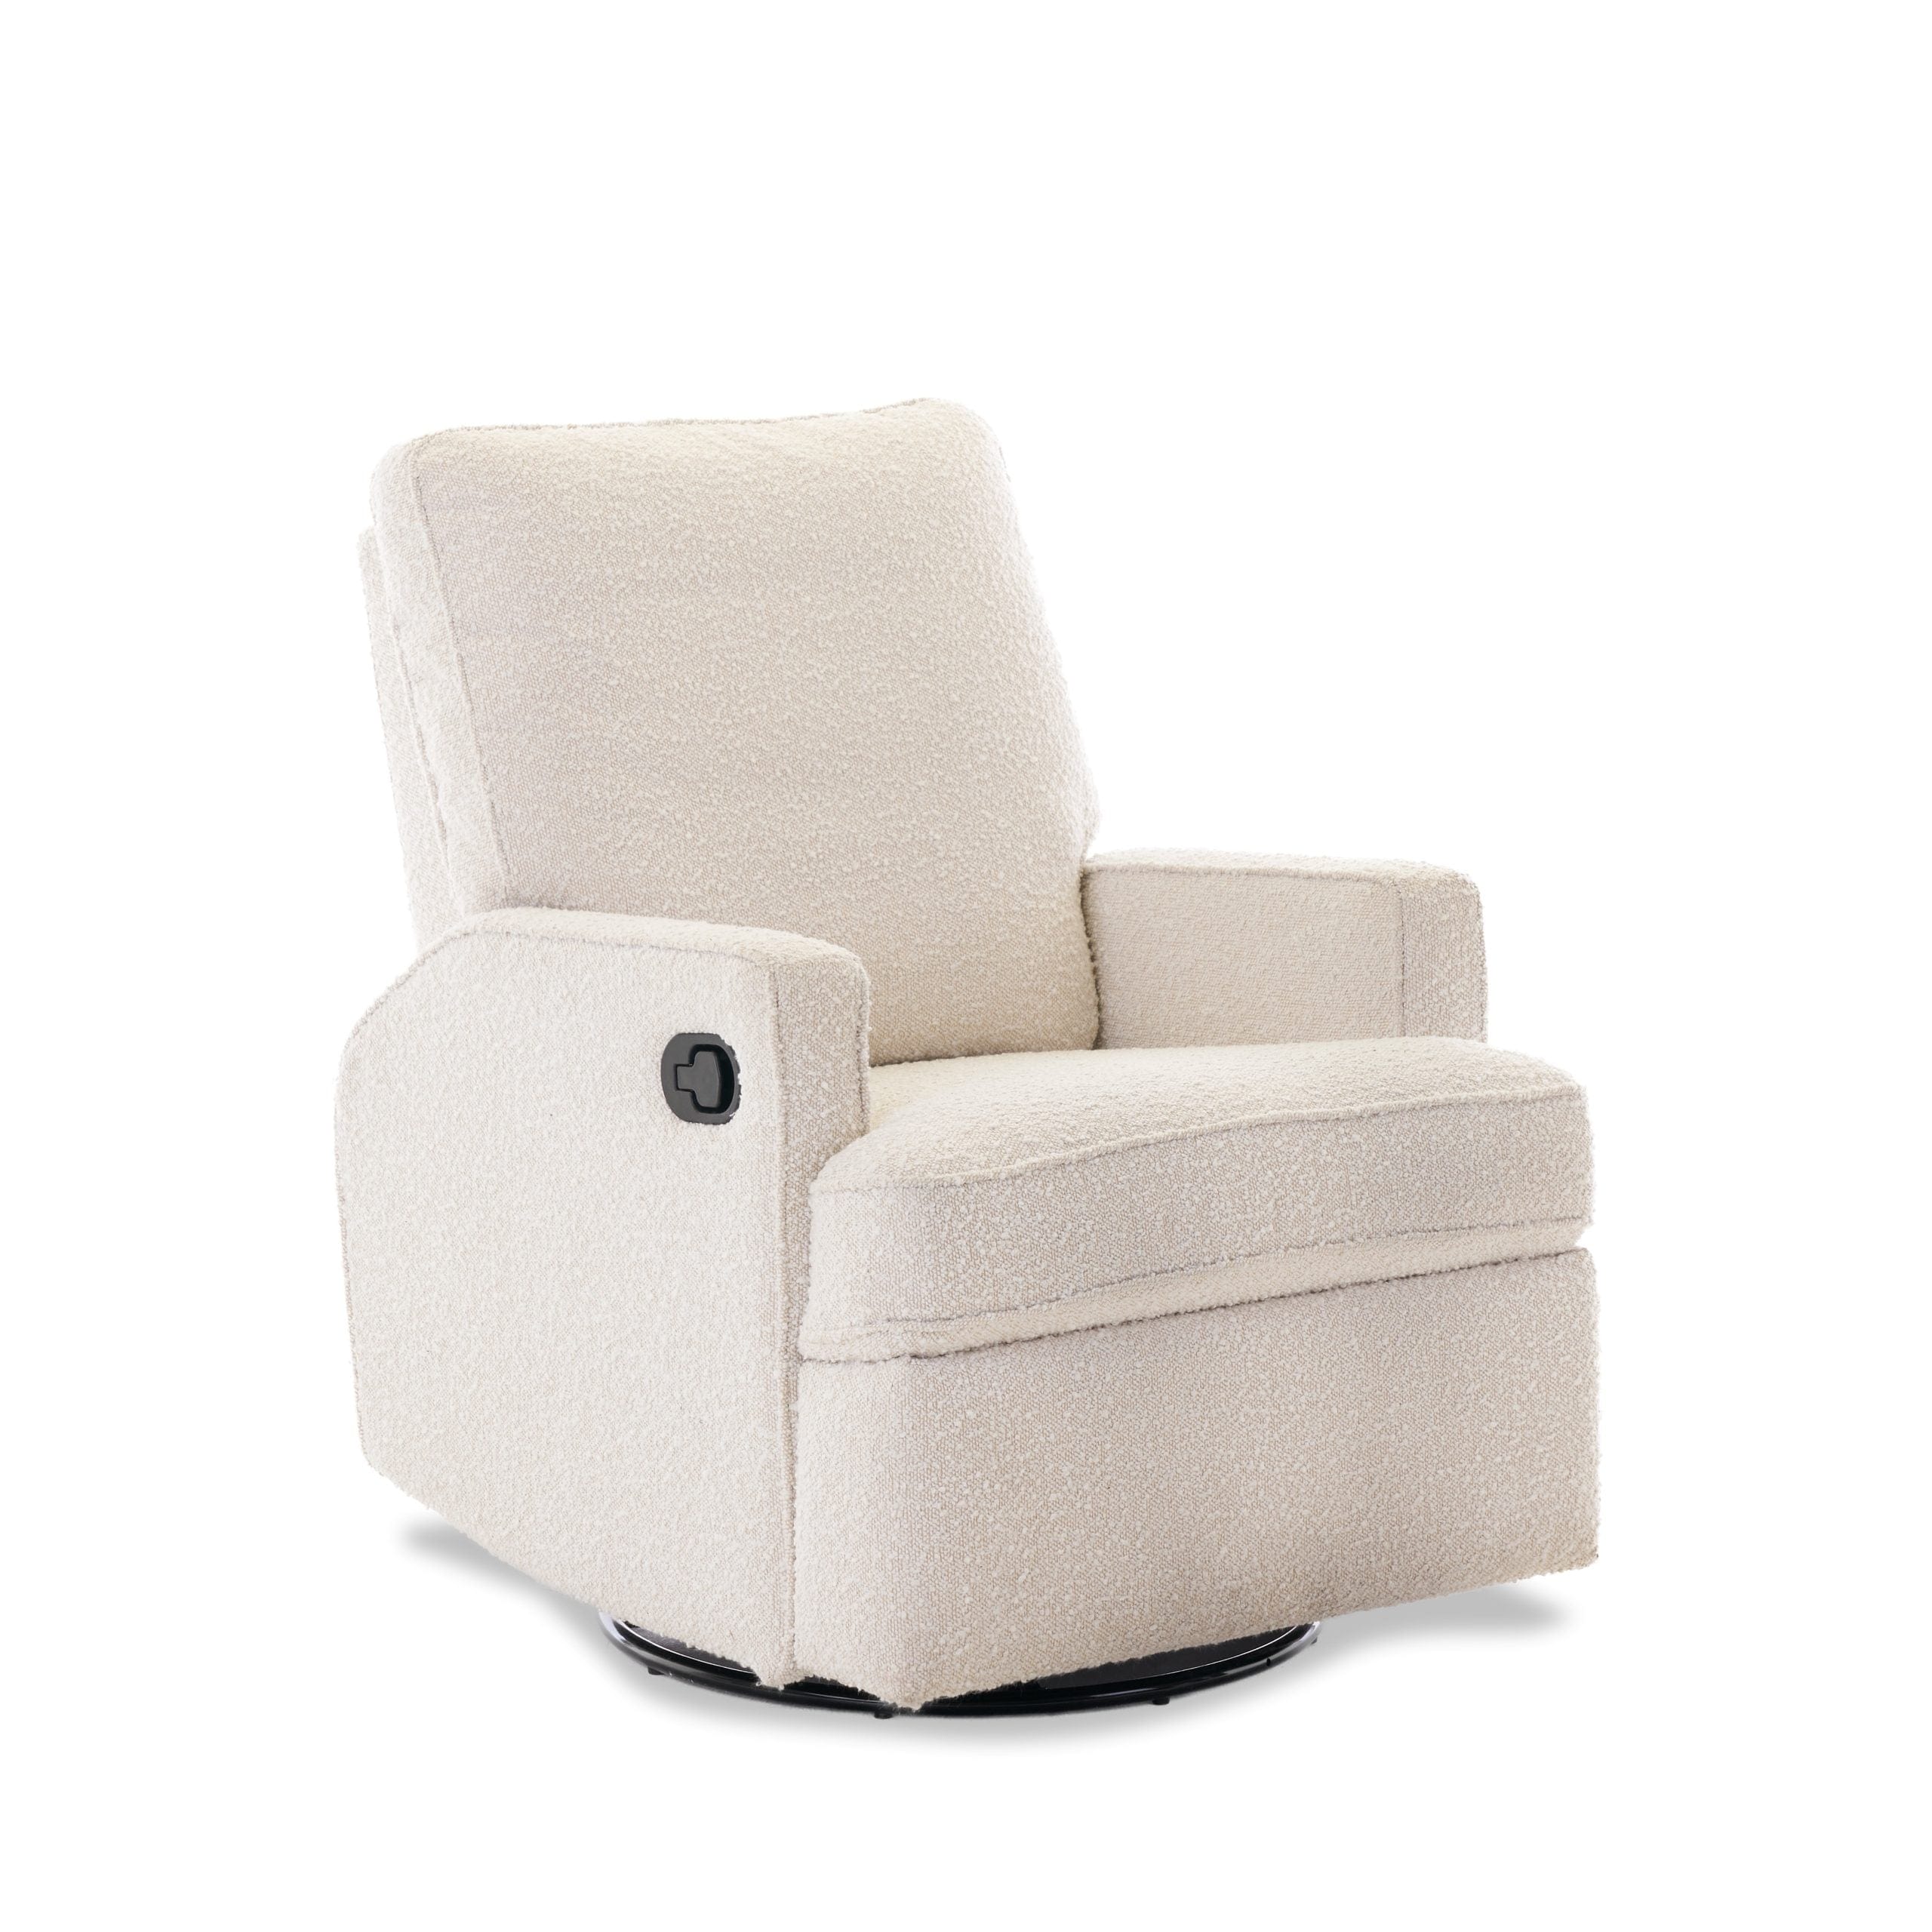 Obaby Nursery Furniture Obaby - Madison Swivel Glider Recliner Chair - Direct Delivery